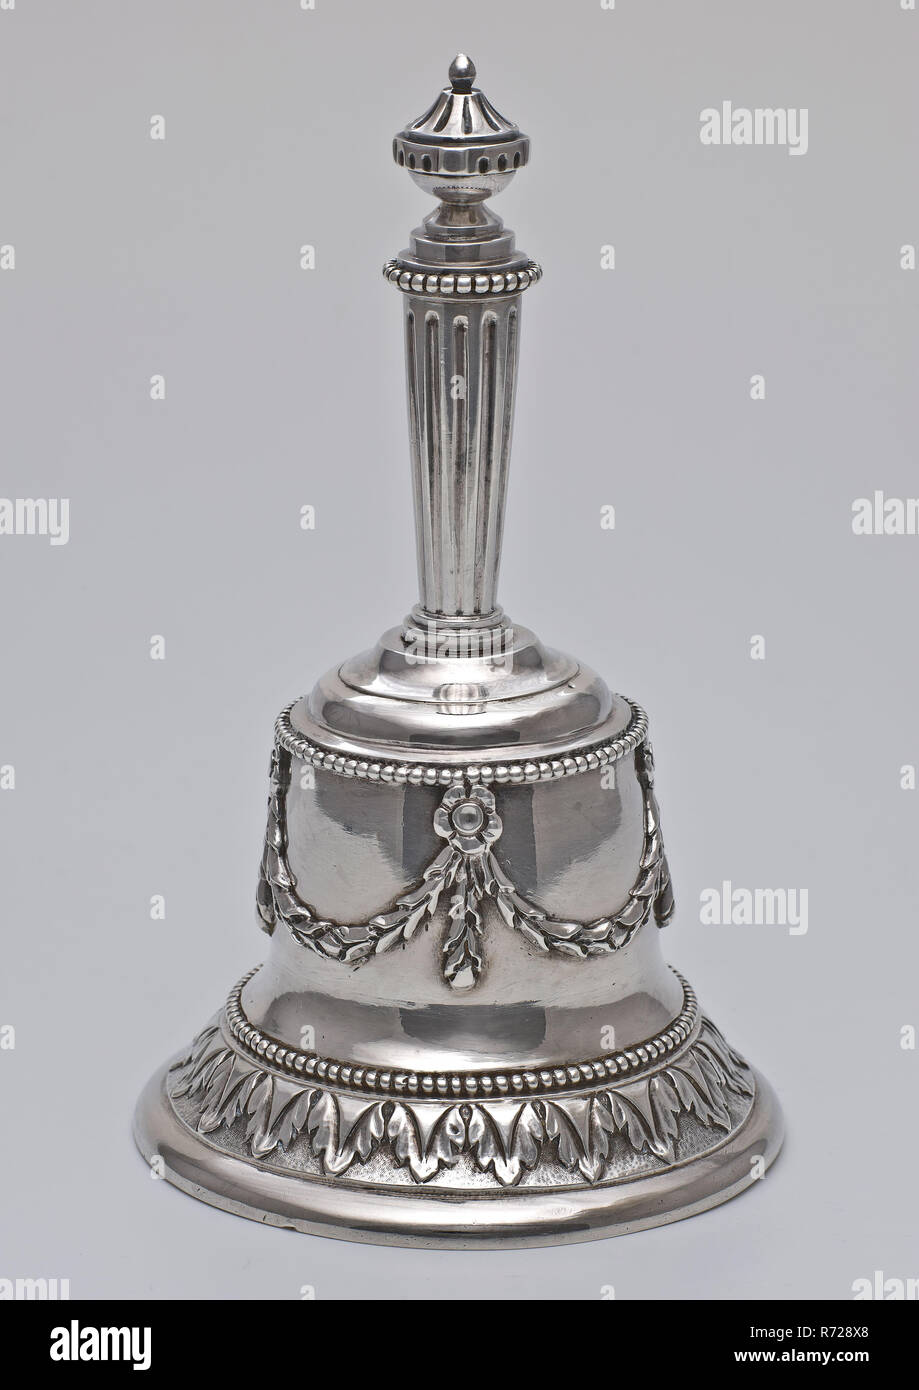 Silversmith: Johannes La Blanc, Bell-shaped, silver bell with clapper,  decorated with leaf garlands, acanthus leaf motifs and rosettes, table bell  sound medium silver, cast appliqued bell-shaped bell, with clapper, fluted  baluster-shaped stem